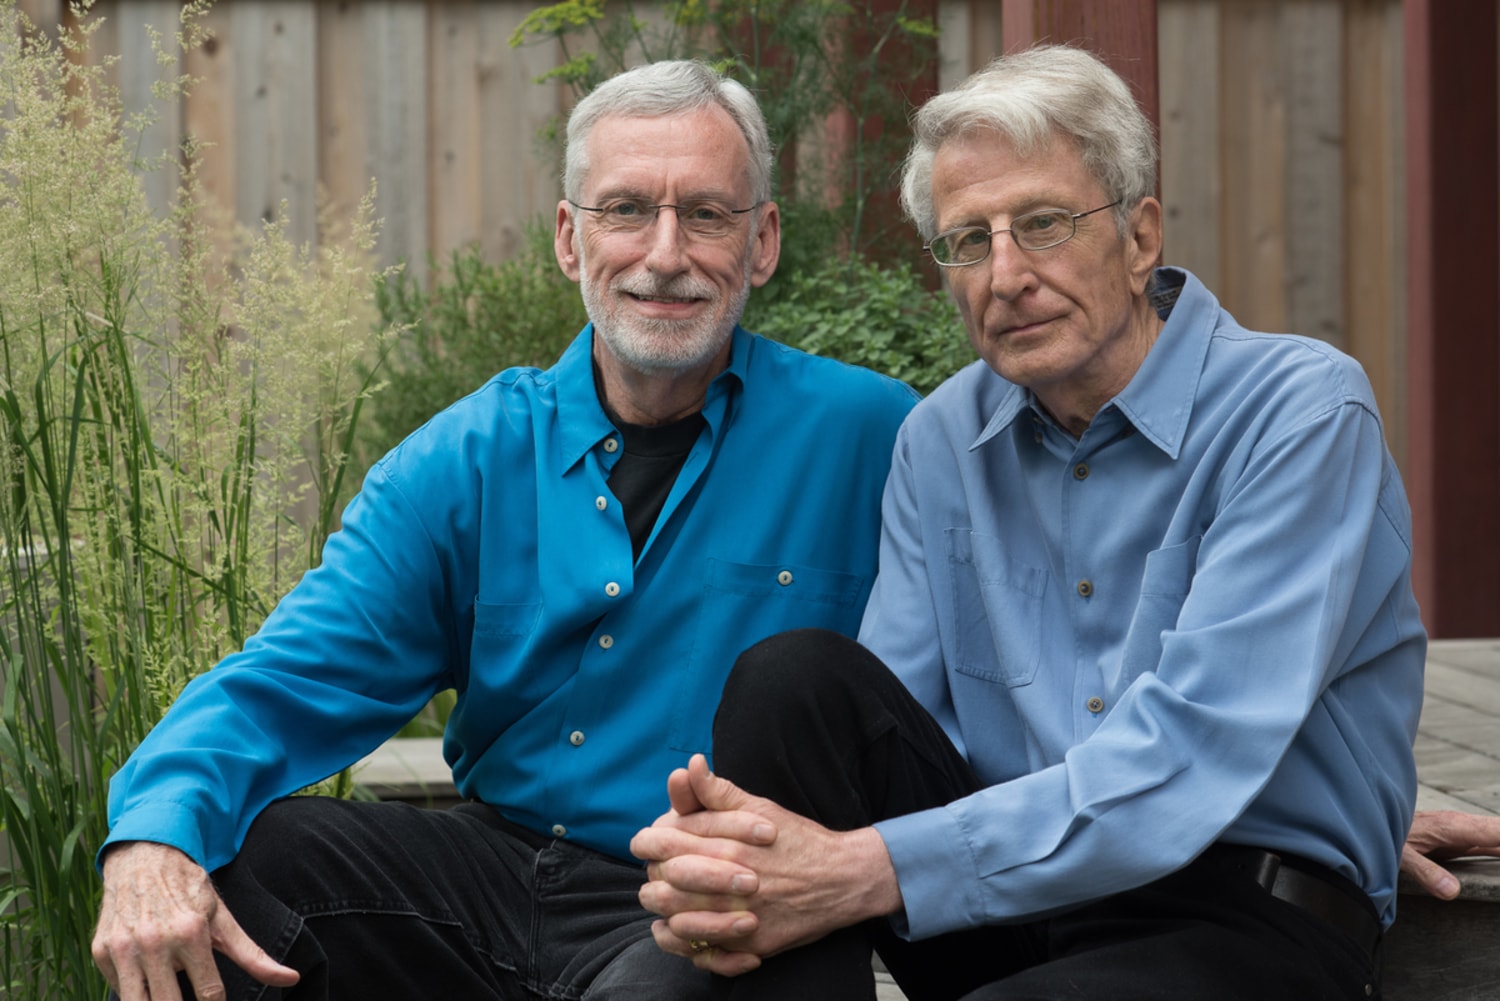 After decades-long legal battle, gay couples 1971 marriage officially recognized picture